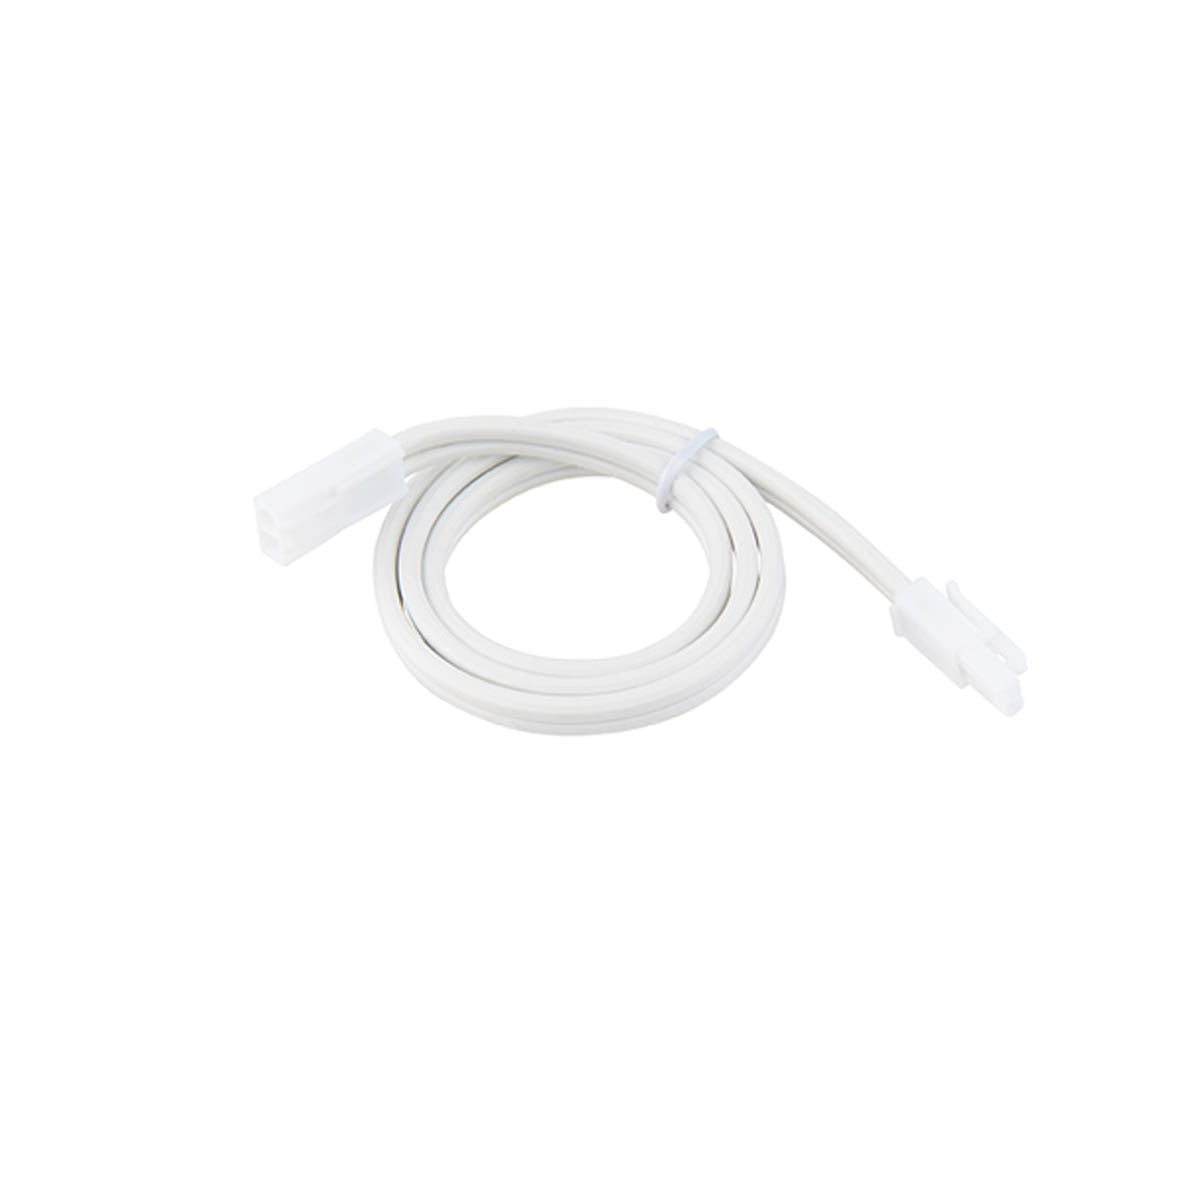 24in. Interconnect Cable for 3-CCT Puck Light, White